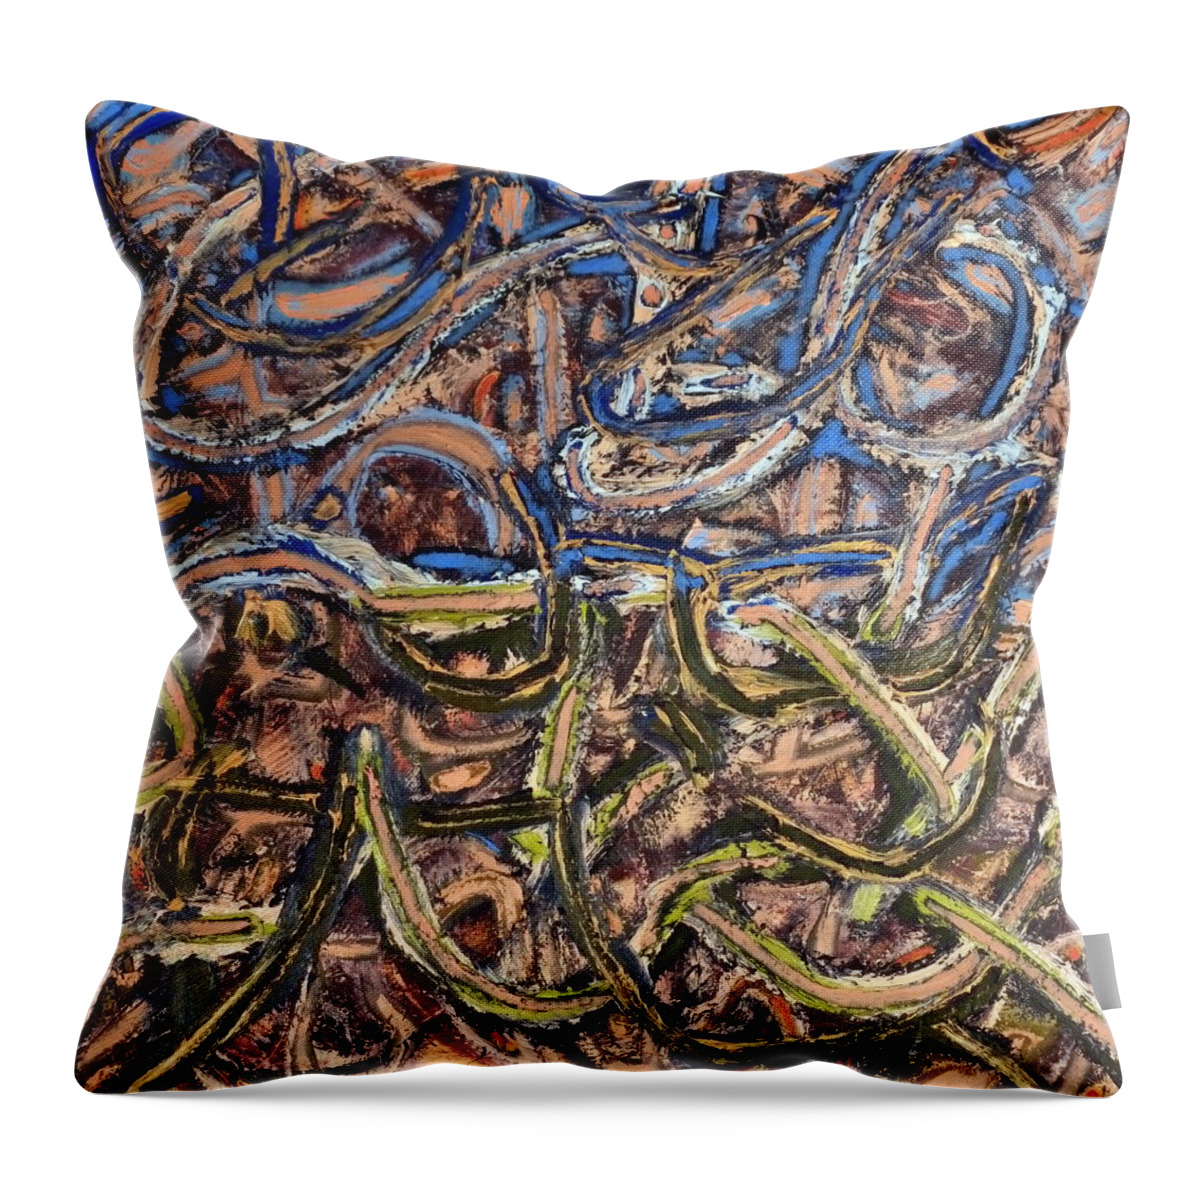  Landscape Throw Pillow featuring the painting Landscape Movement by JC Armbruster